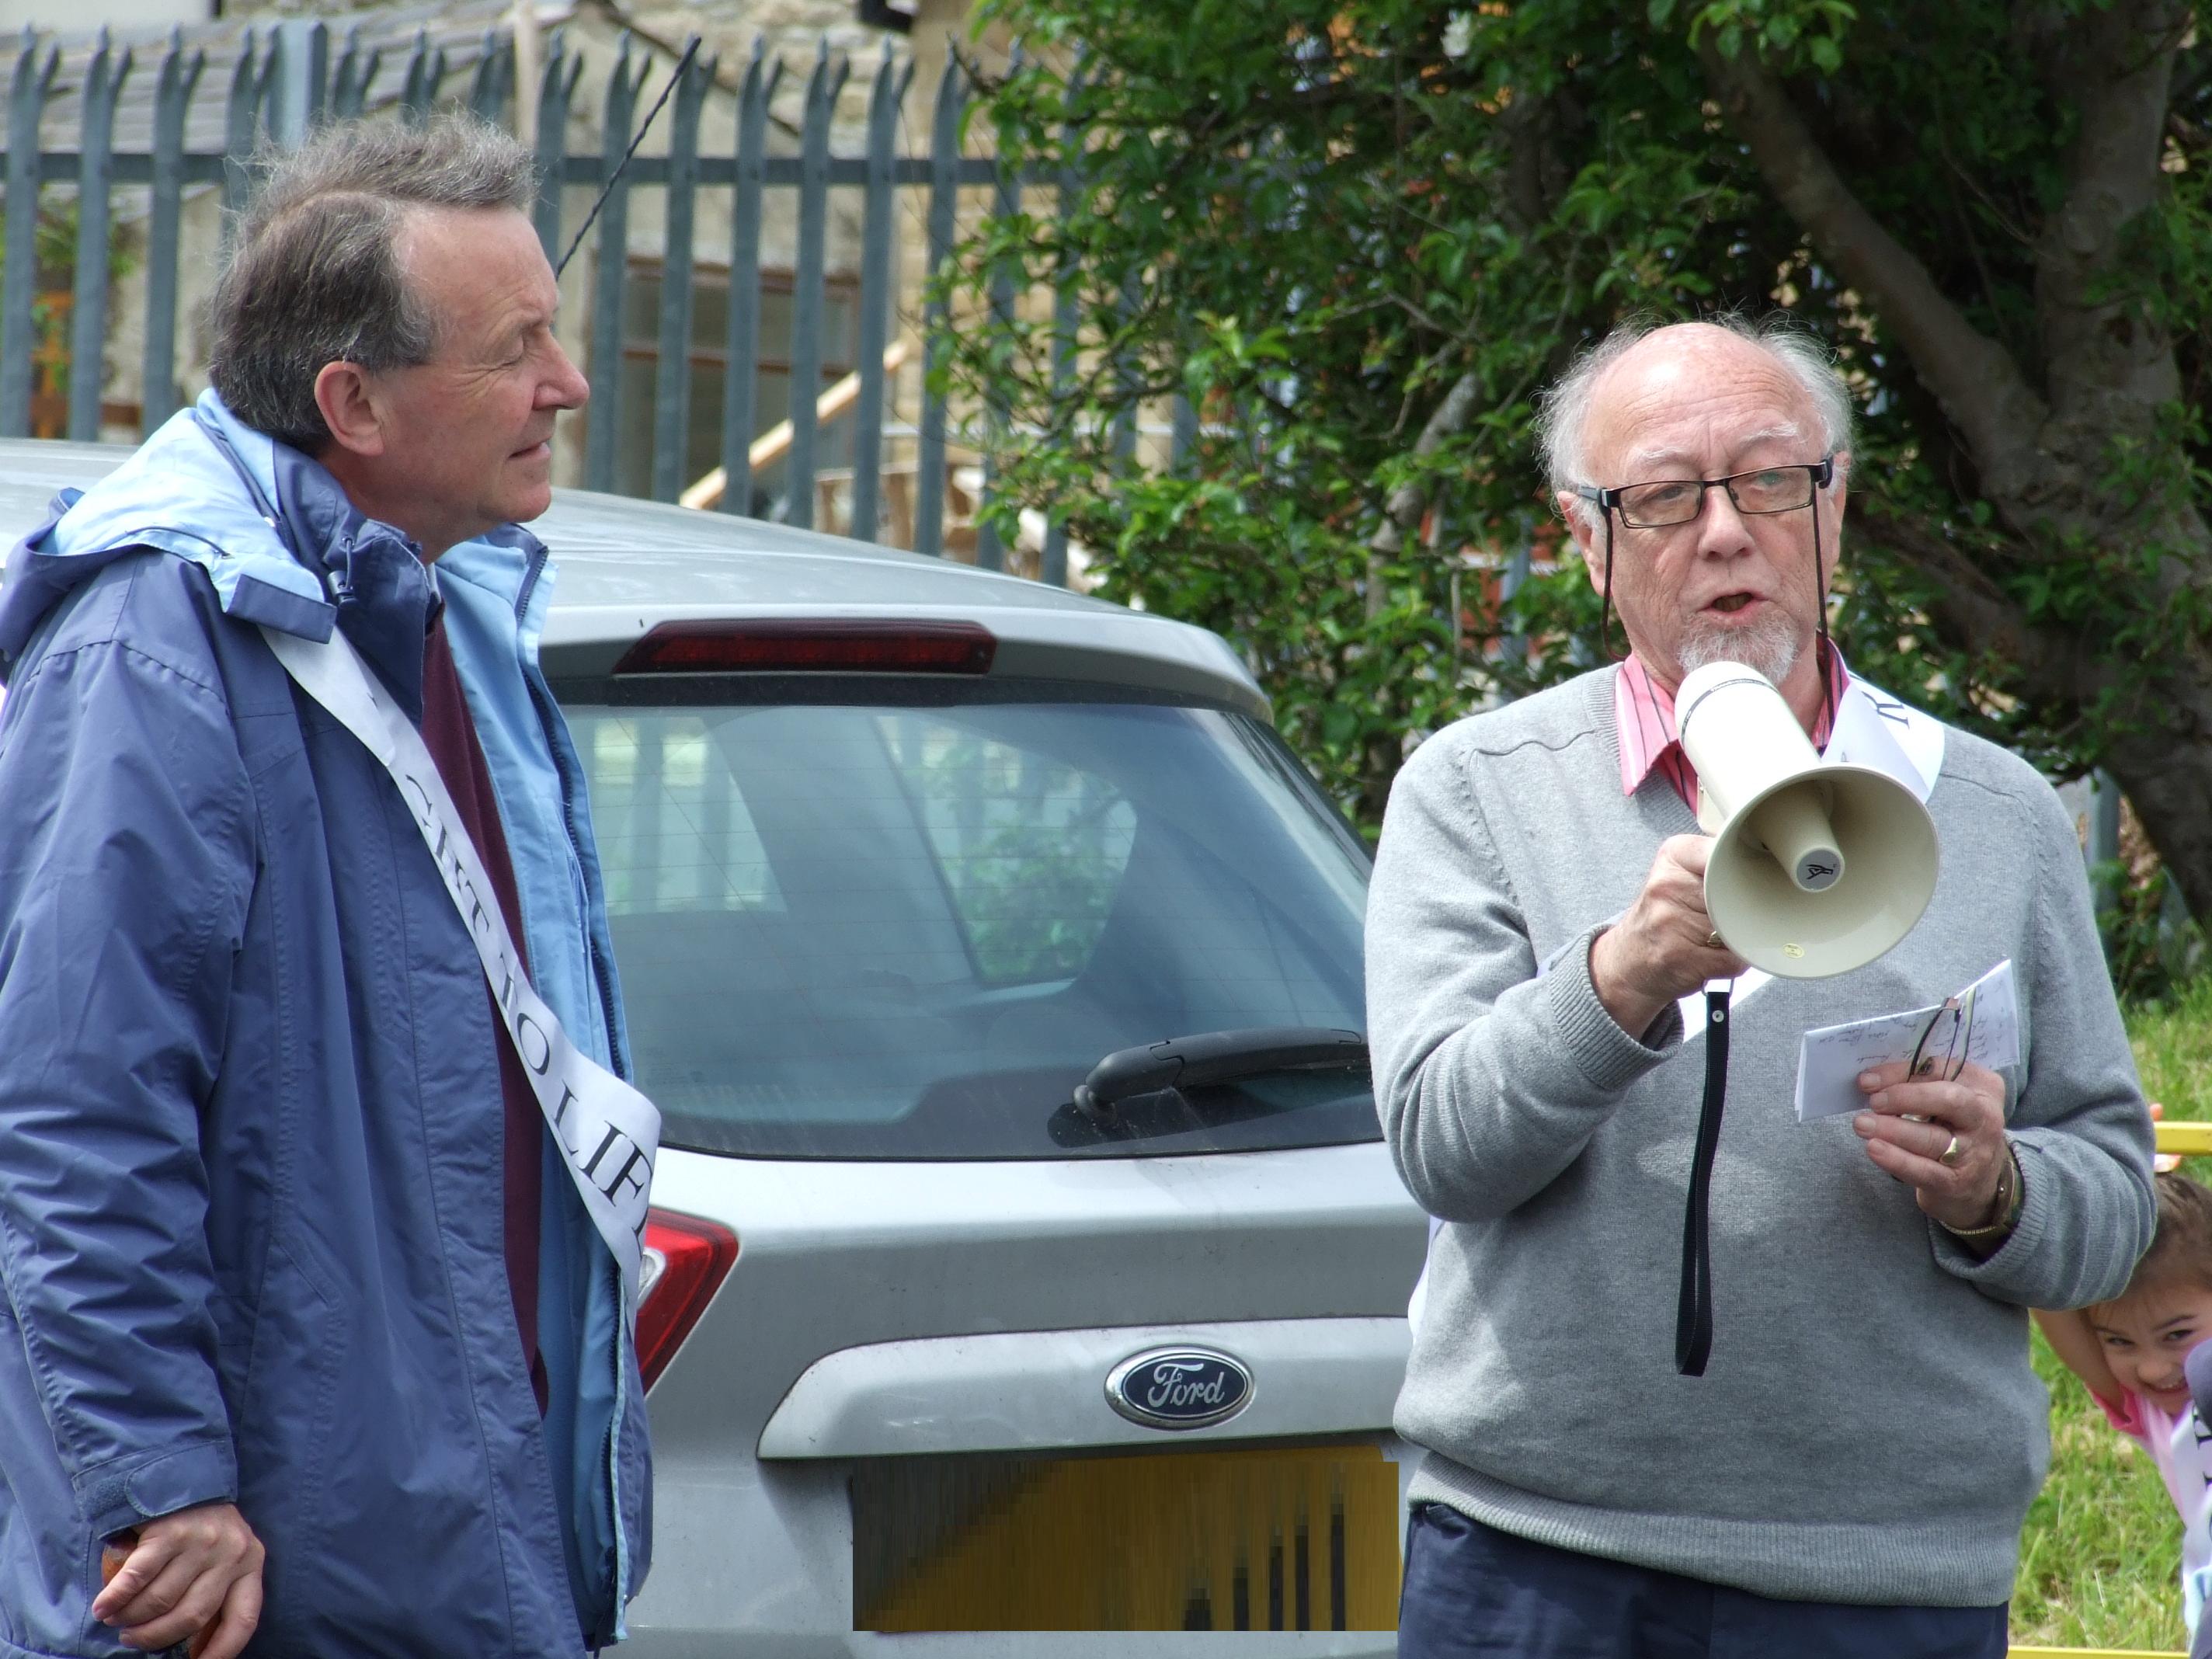 David Alton and Jim Dobbin MP at the commencement of the RTL charity walk across Ribble Valley, 2014.